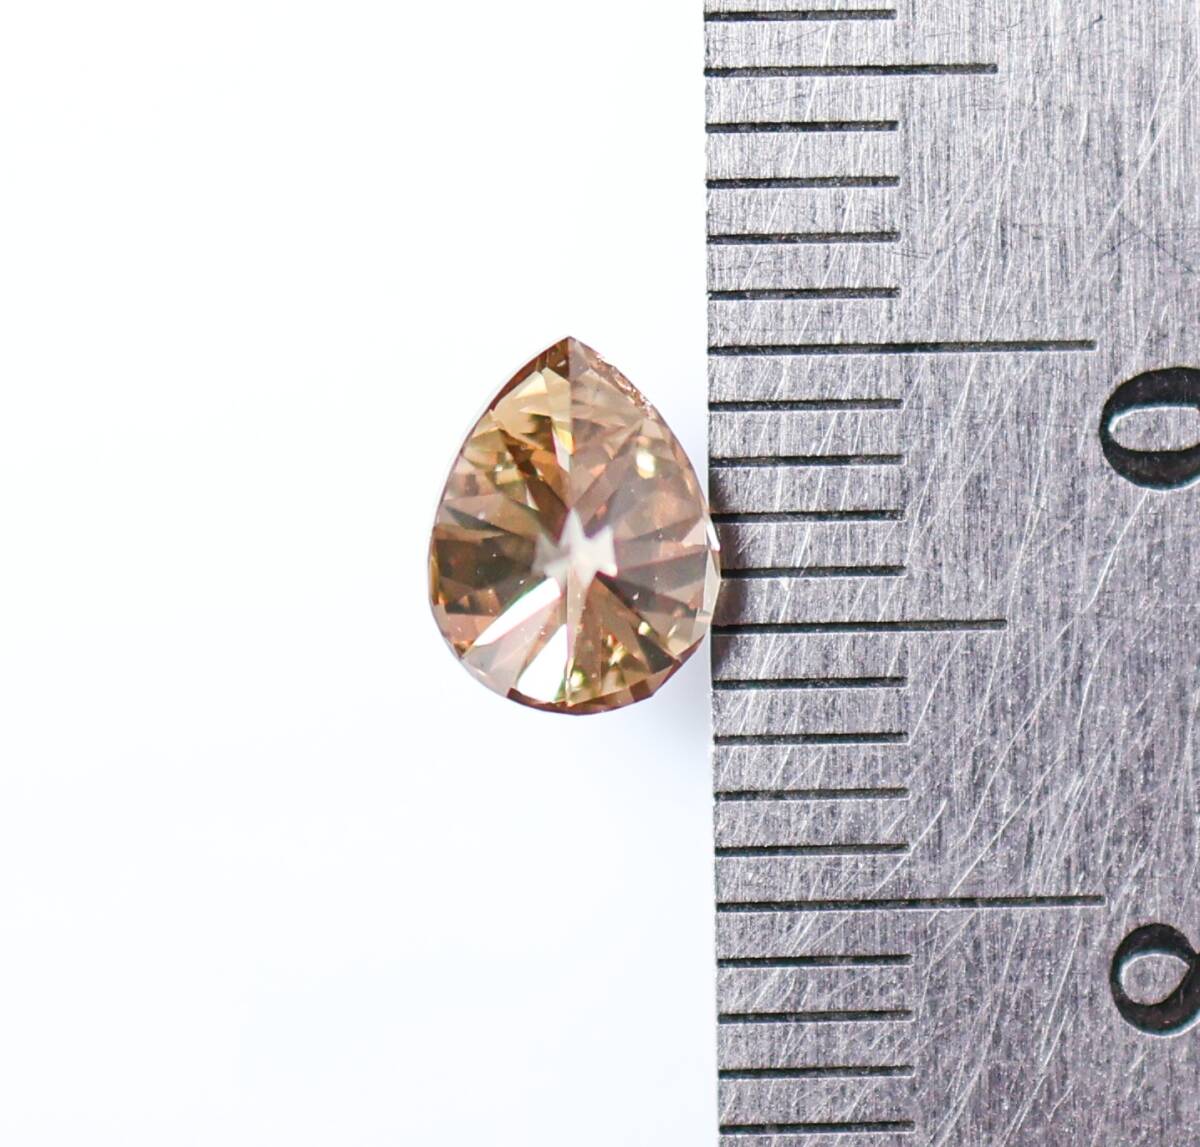 [100 jpy ~]1.052ct! natural diamond FANCY LIGHT BROWN( natural color )SI1 PS cut 